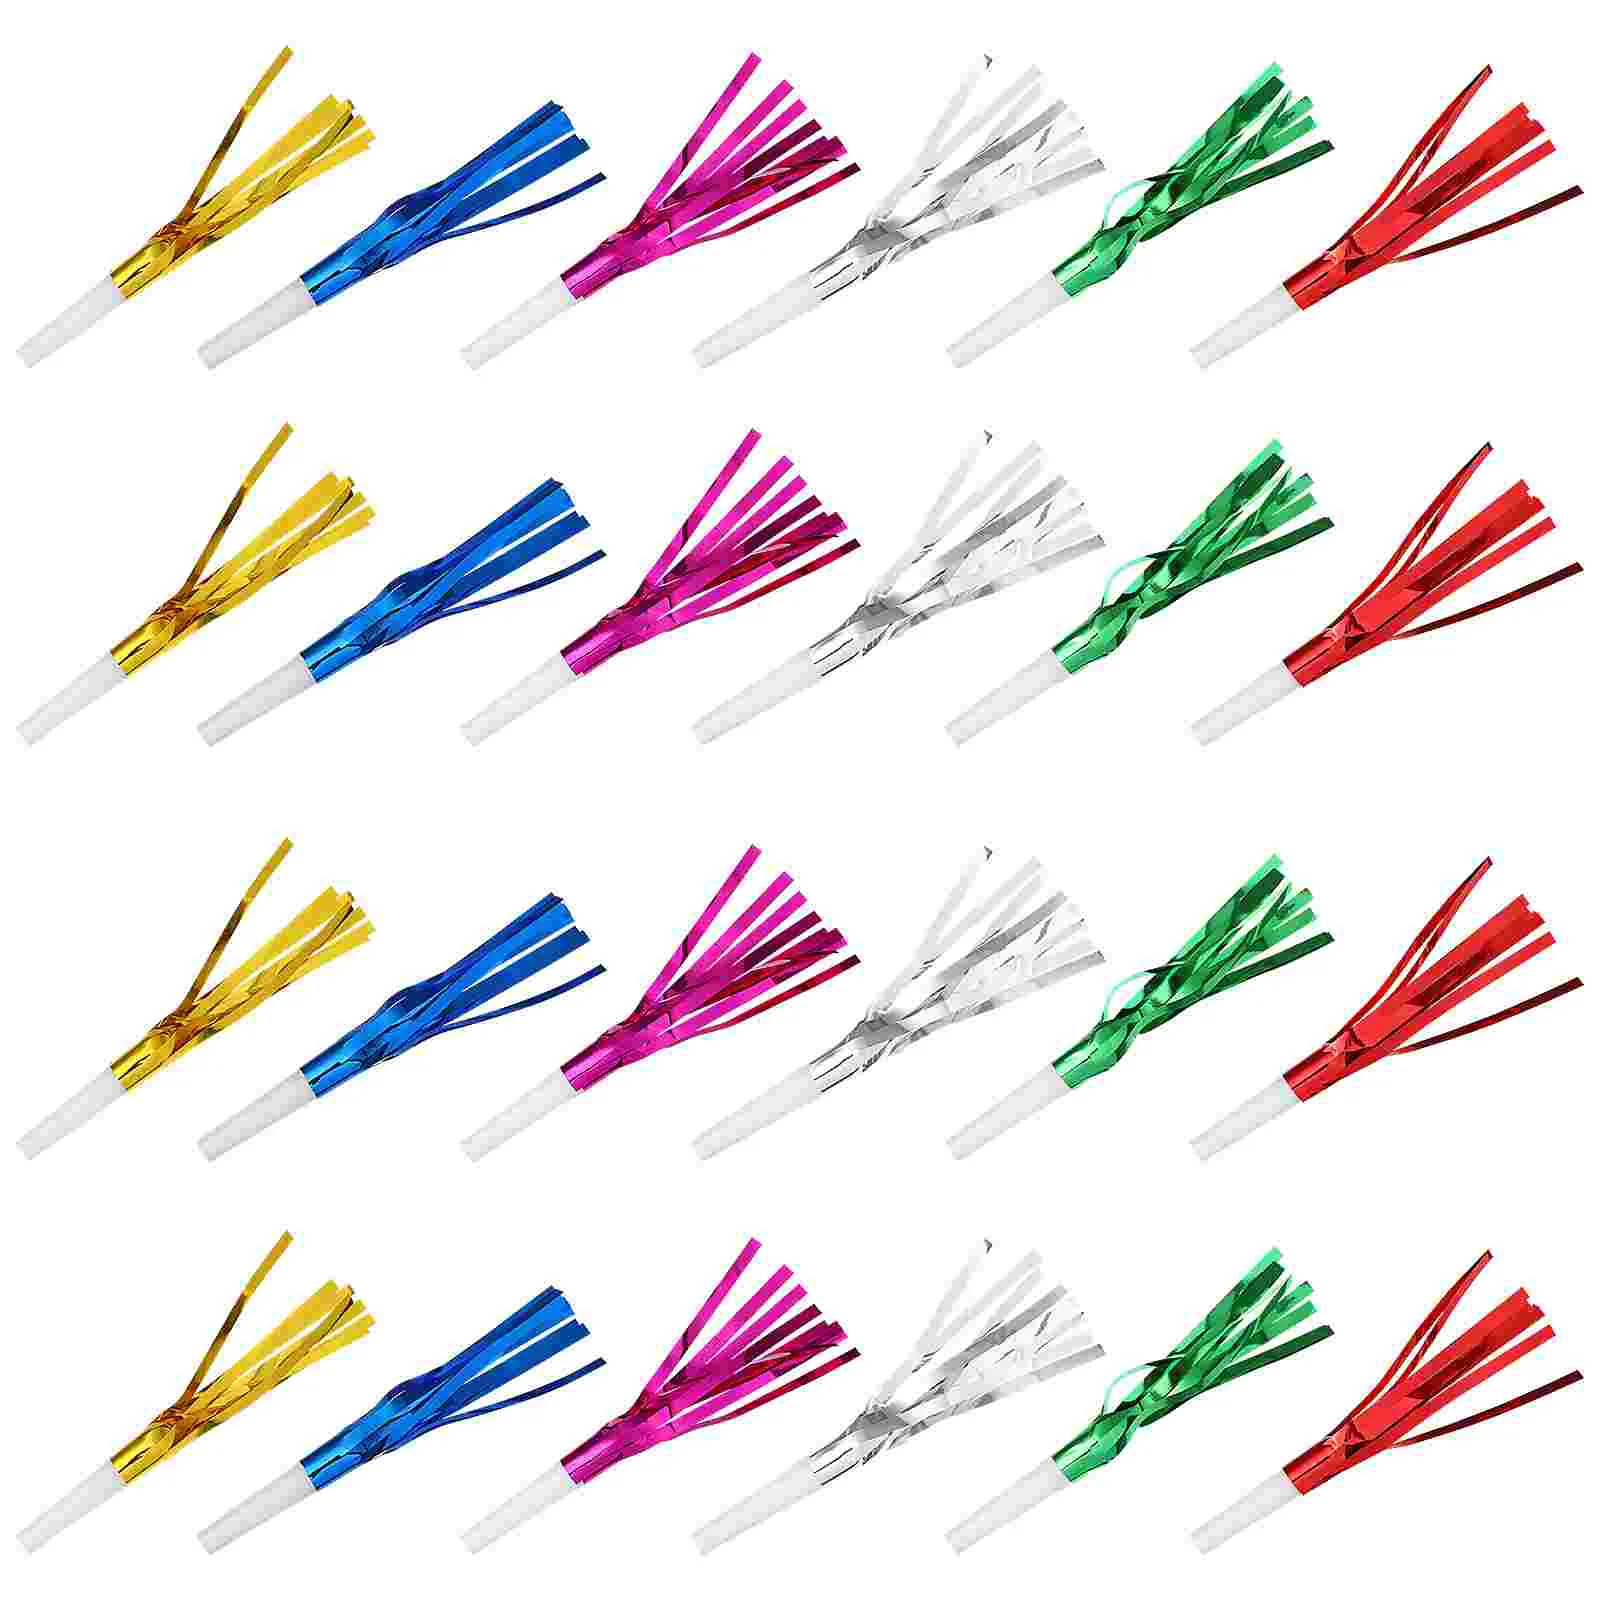 

Party Blowouts Blowers Favors Whistles Whistle Noise Noisemakers Supplies Musical Makers Fringed Birthday Blowout Horns